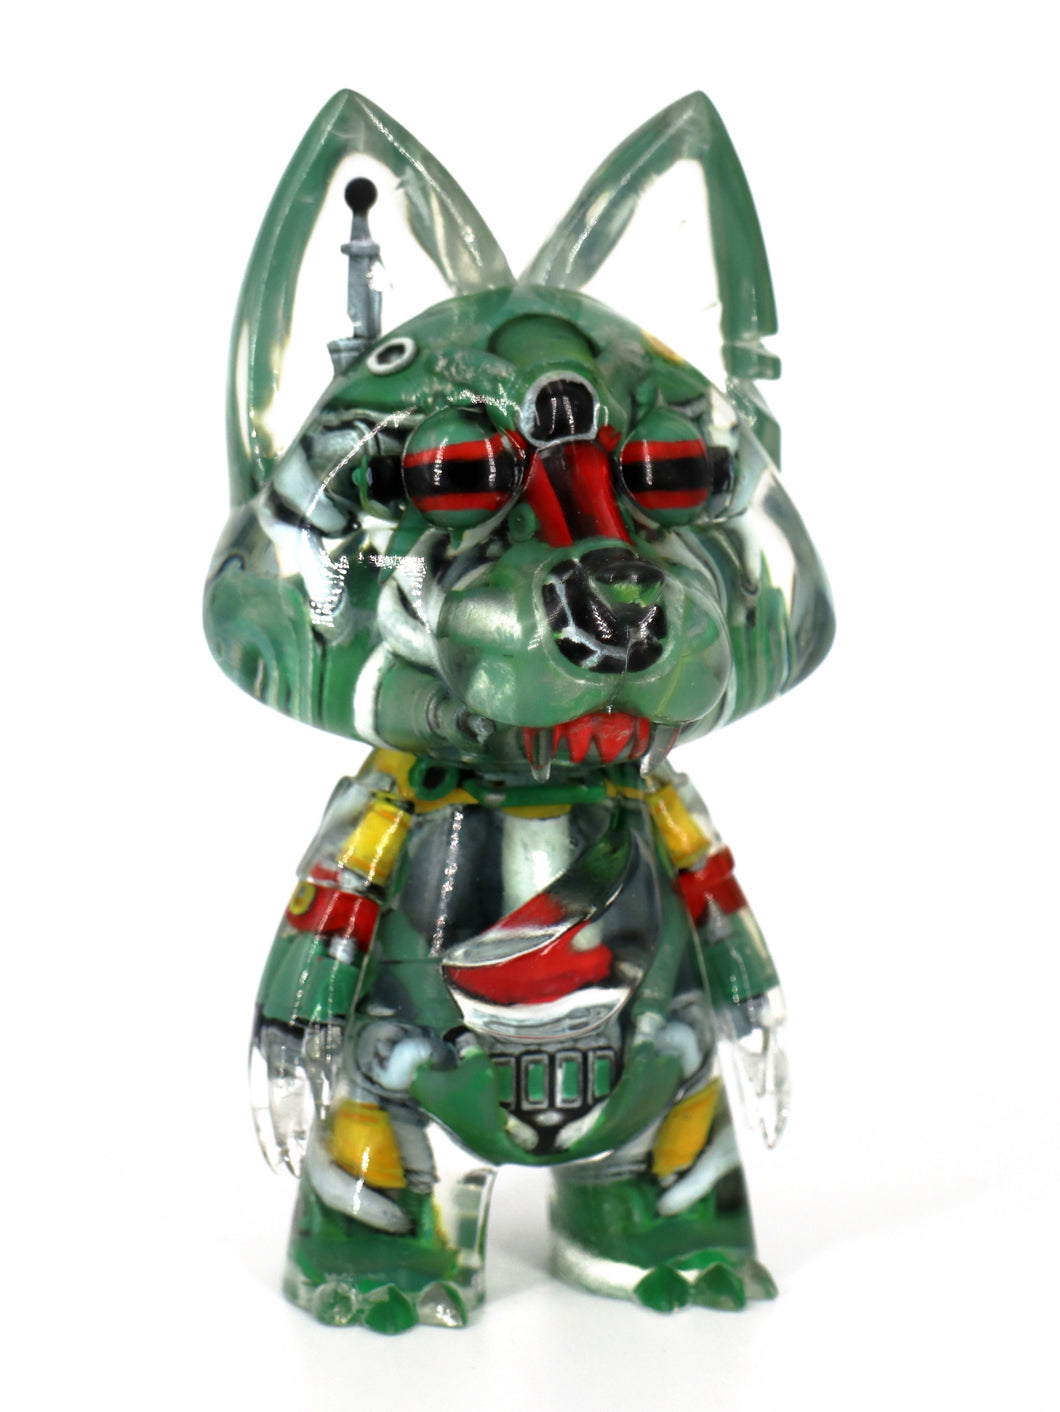 B0UN7Y T3K 64T3K33P3R - Akame Toys x SauceDrops Art - Heroes and Villains